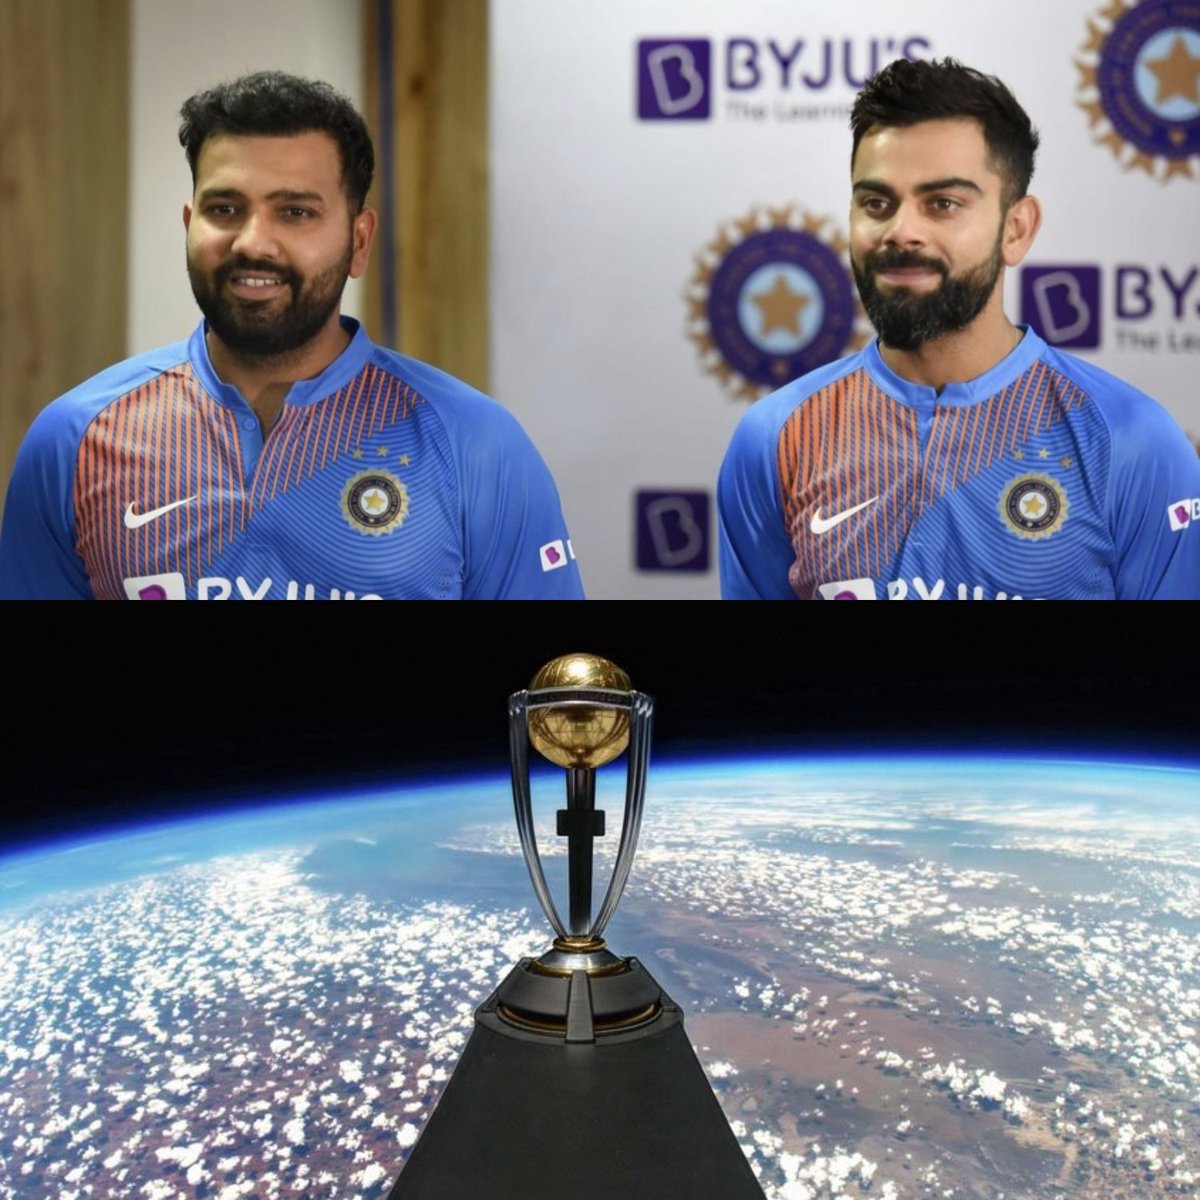 India's World Cup preparation begins from Thursday:

- 3 ODIs Vs West Indies.
- Minimum 5 ODIs in Asia Cup.
- 3 ODIs Vs Australia. https://t.co/f9dJaG5lWx